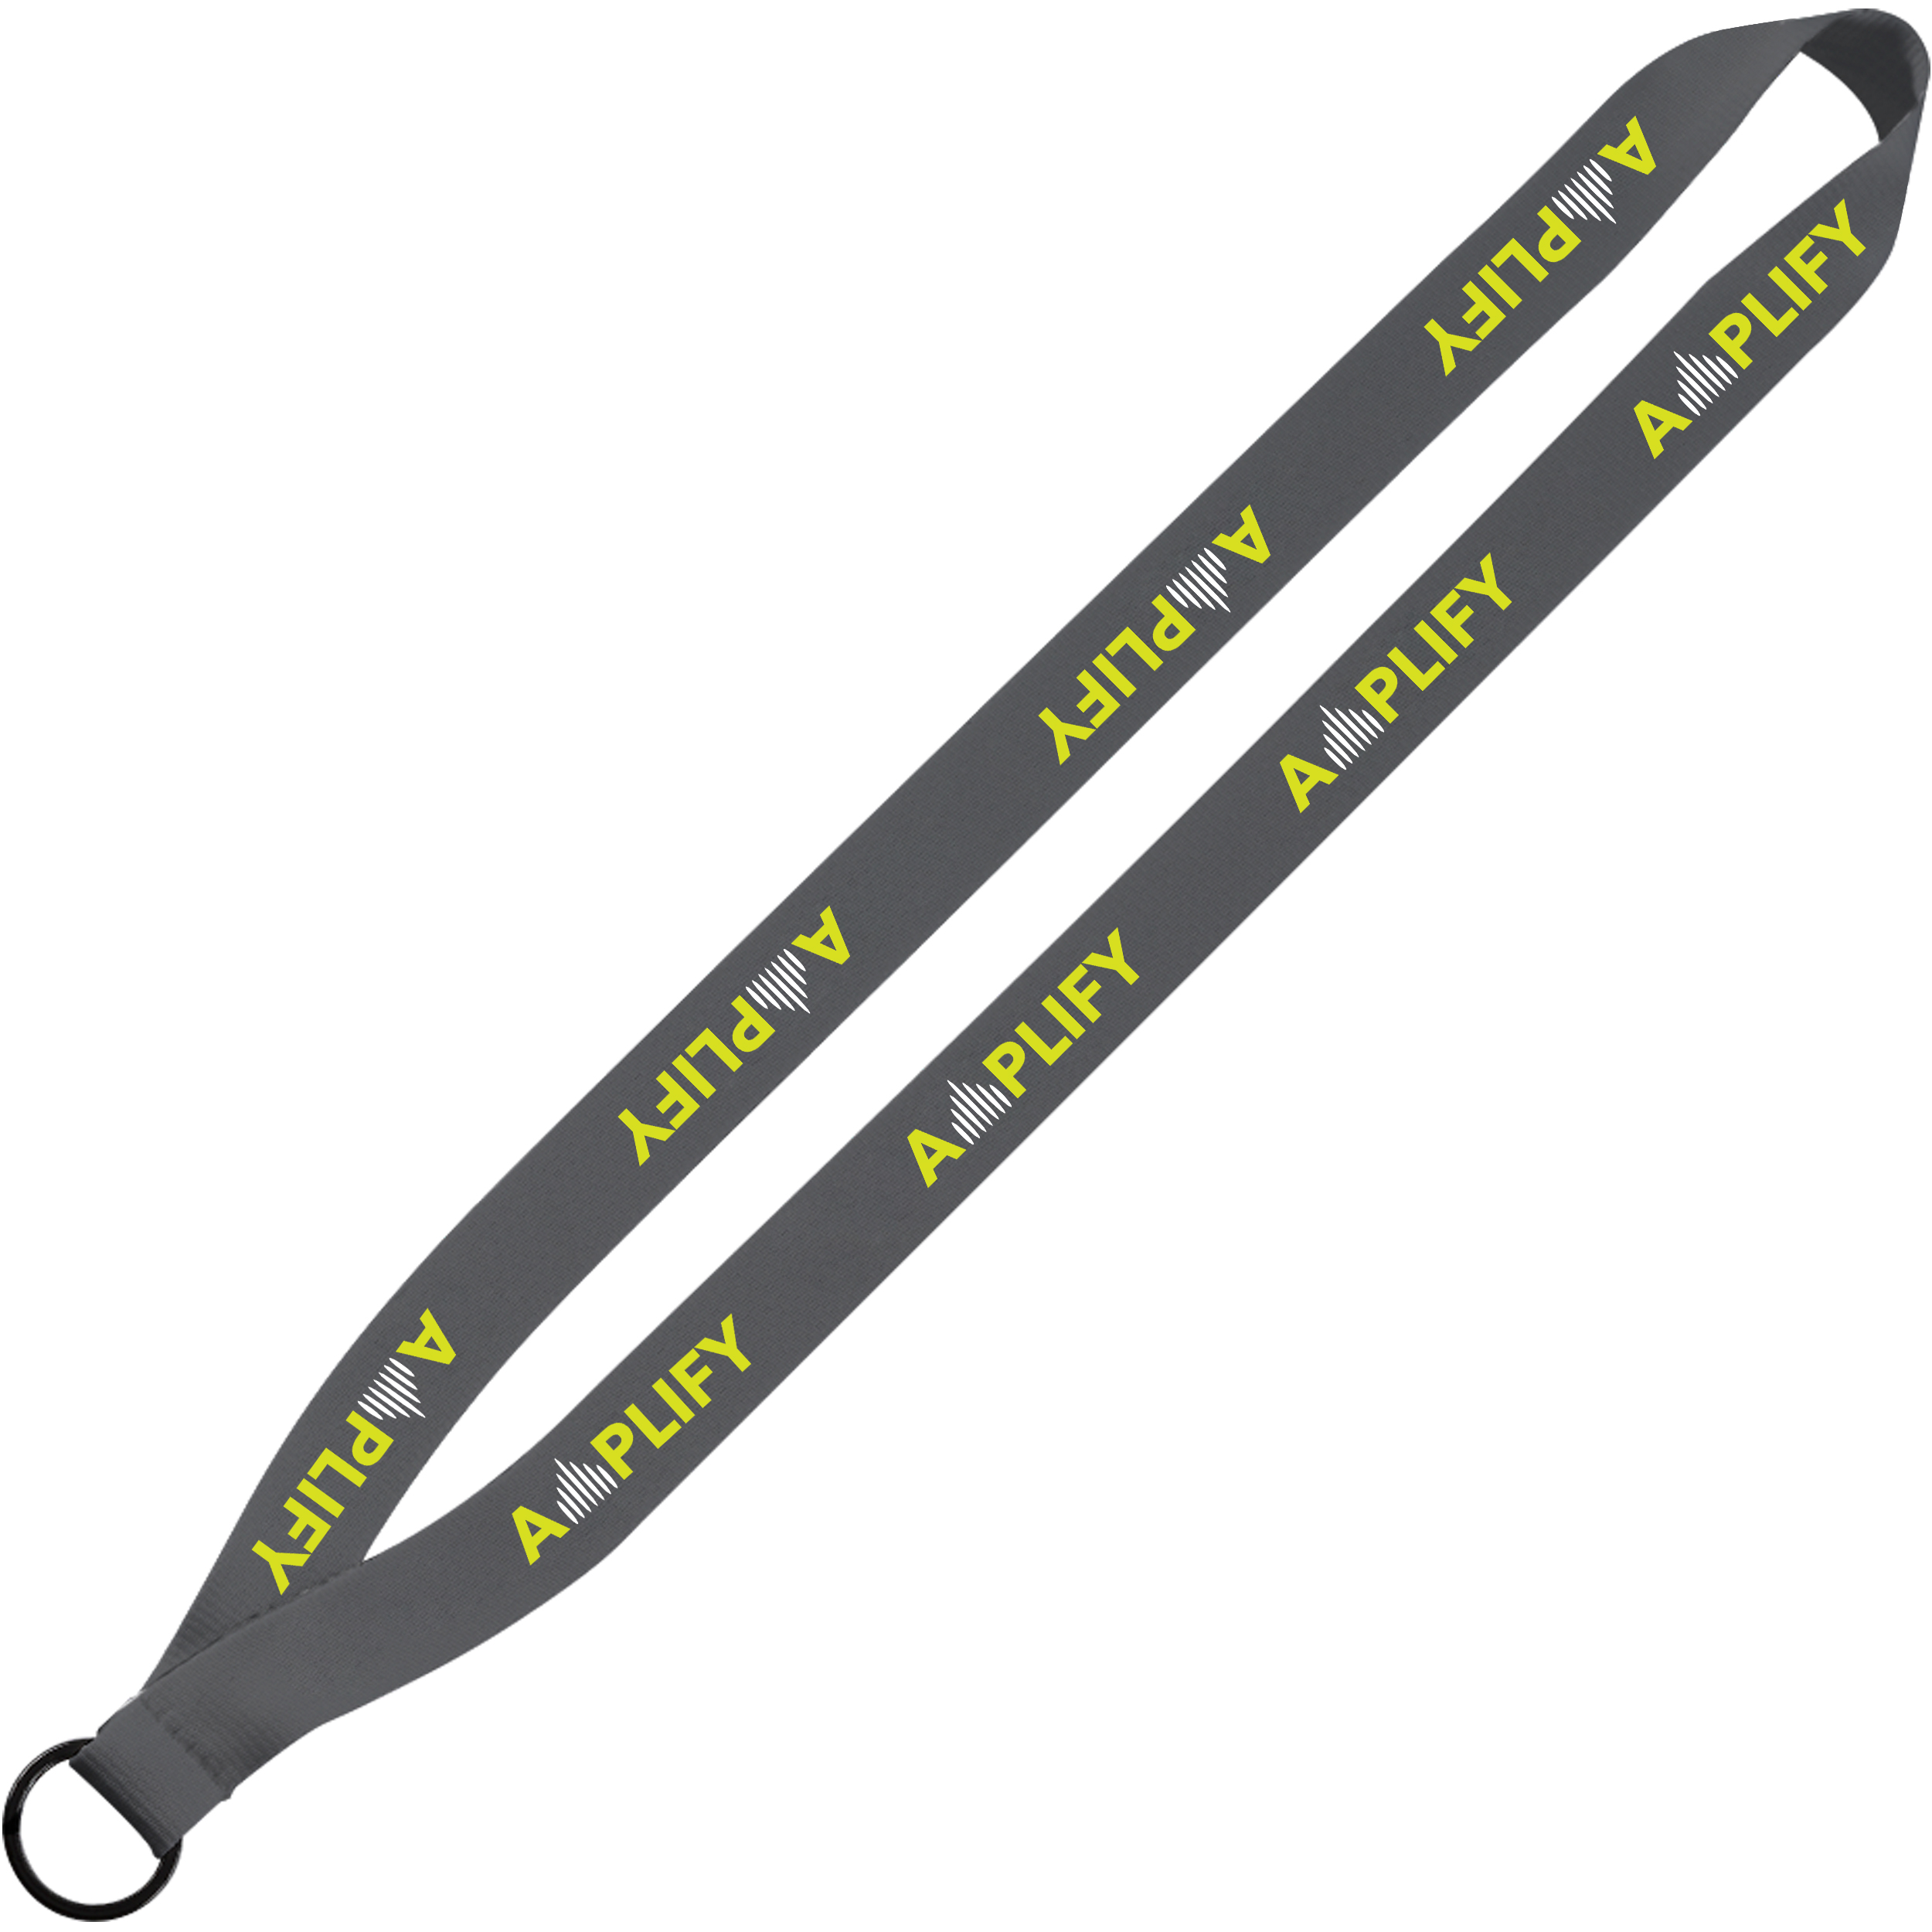  Idea Express 3/8 Wide Blank Lanyards Black with Swivel Hook  Attachment (Qty. 100) : Office Products